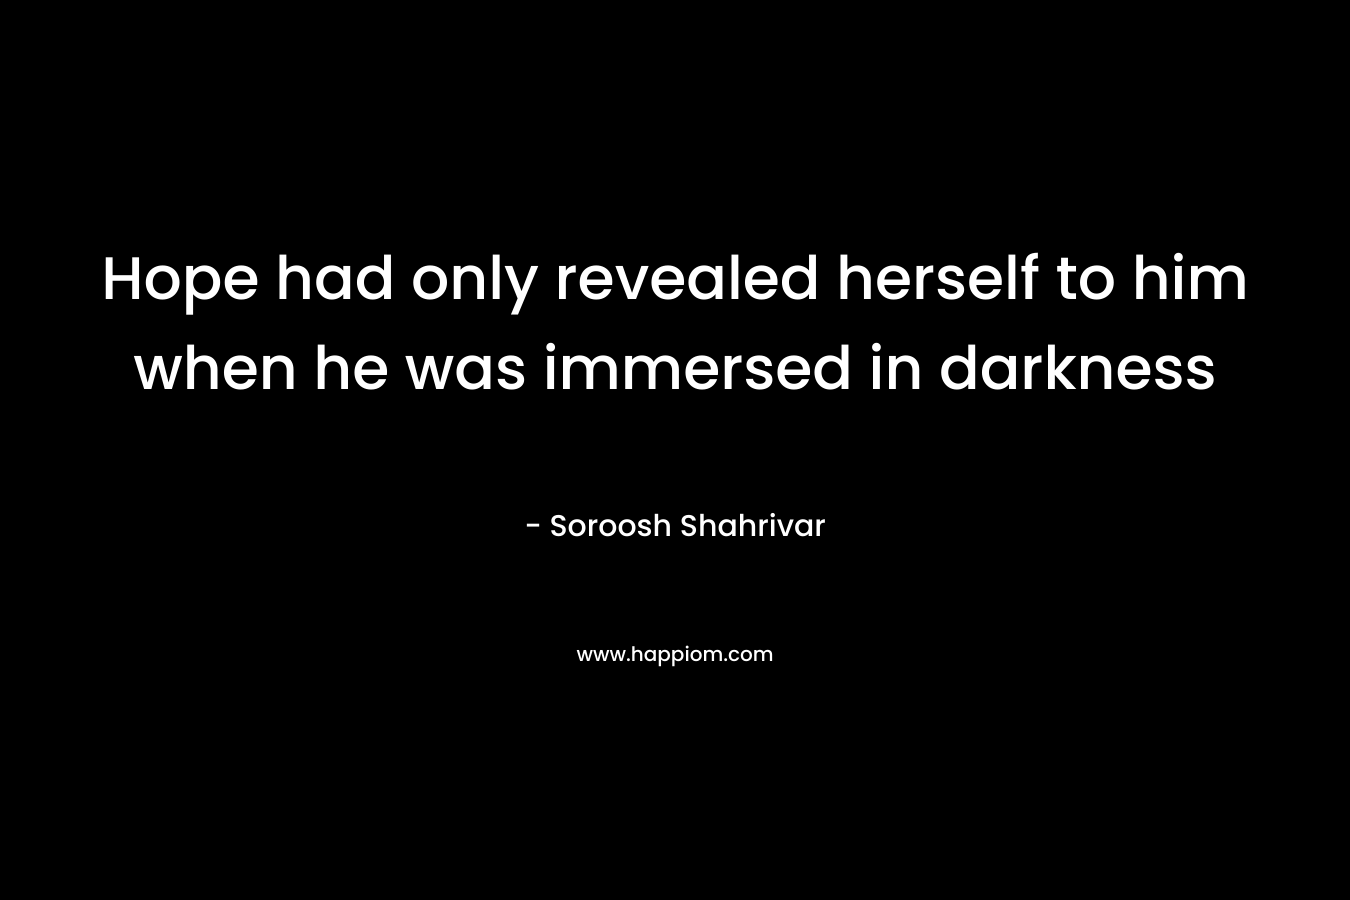 Hope had only revealed herself to him when he was immersed in darkness – Soroosh Shahrivar